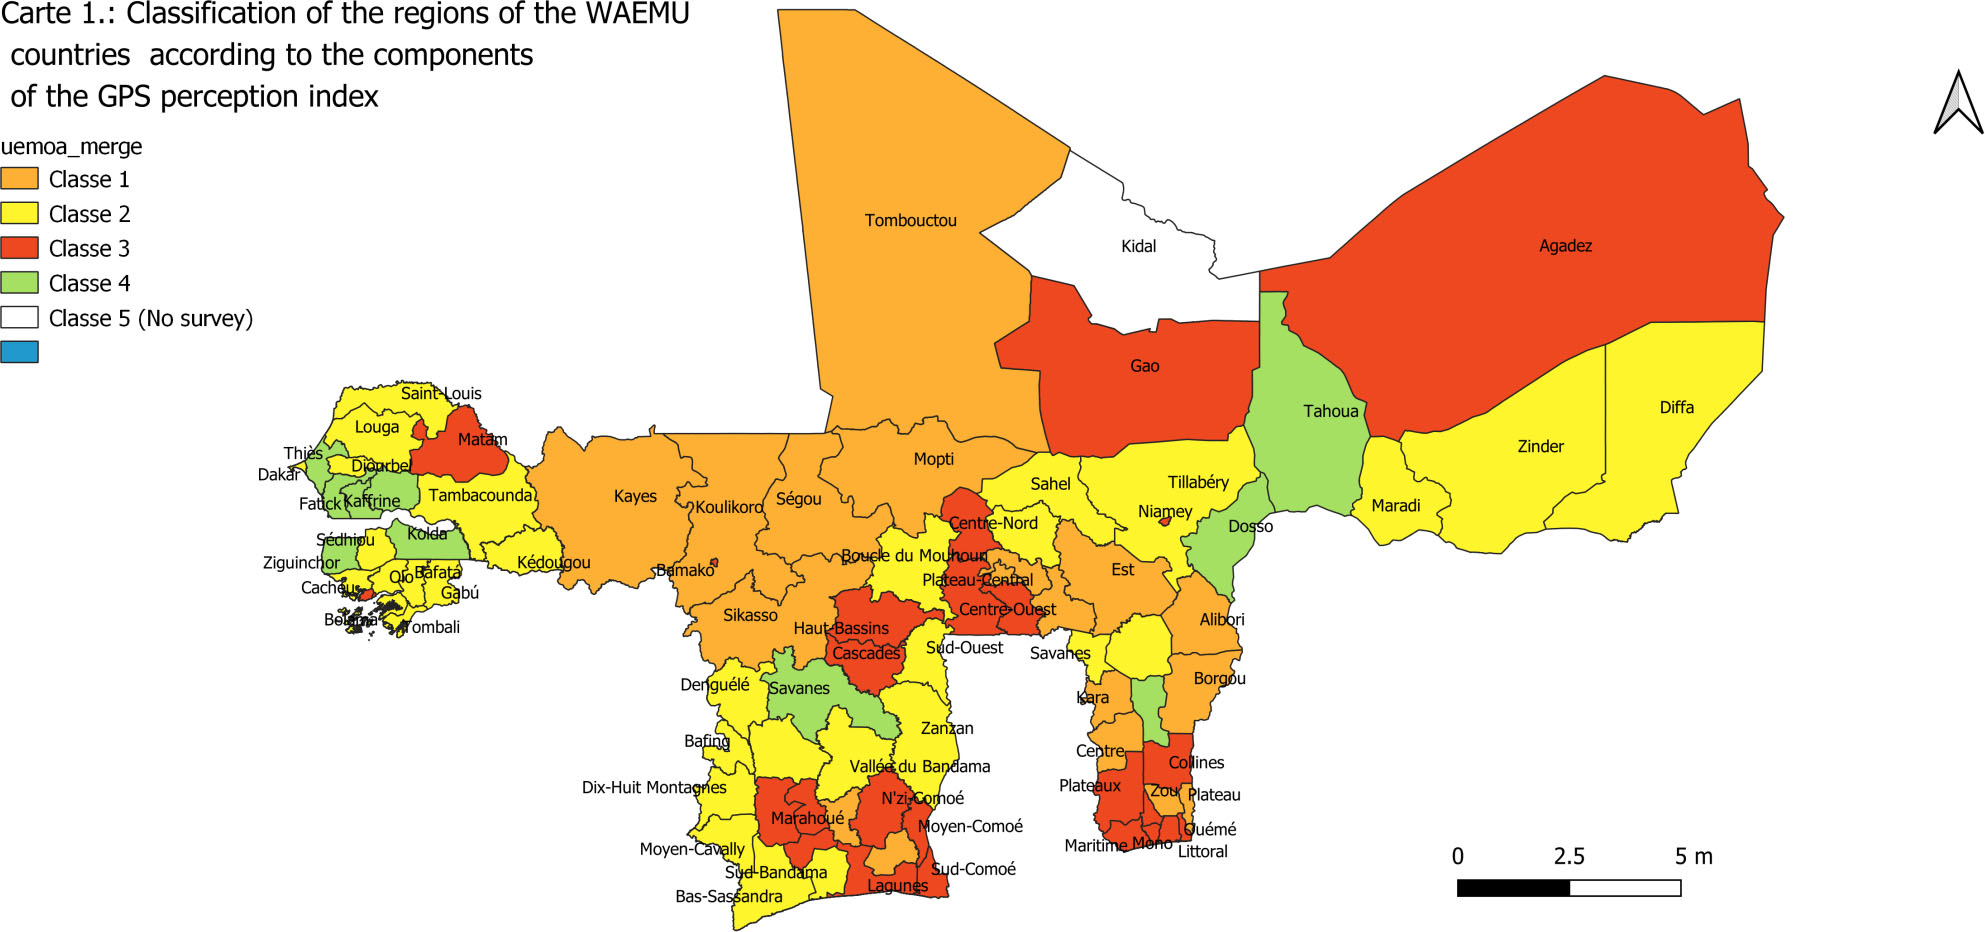 Classification of the regions of the WAEMU countries according to the components of the GPS perception index.